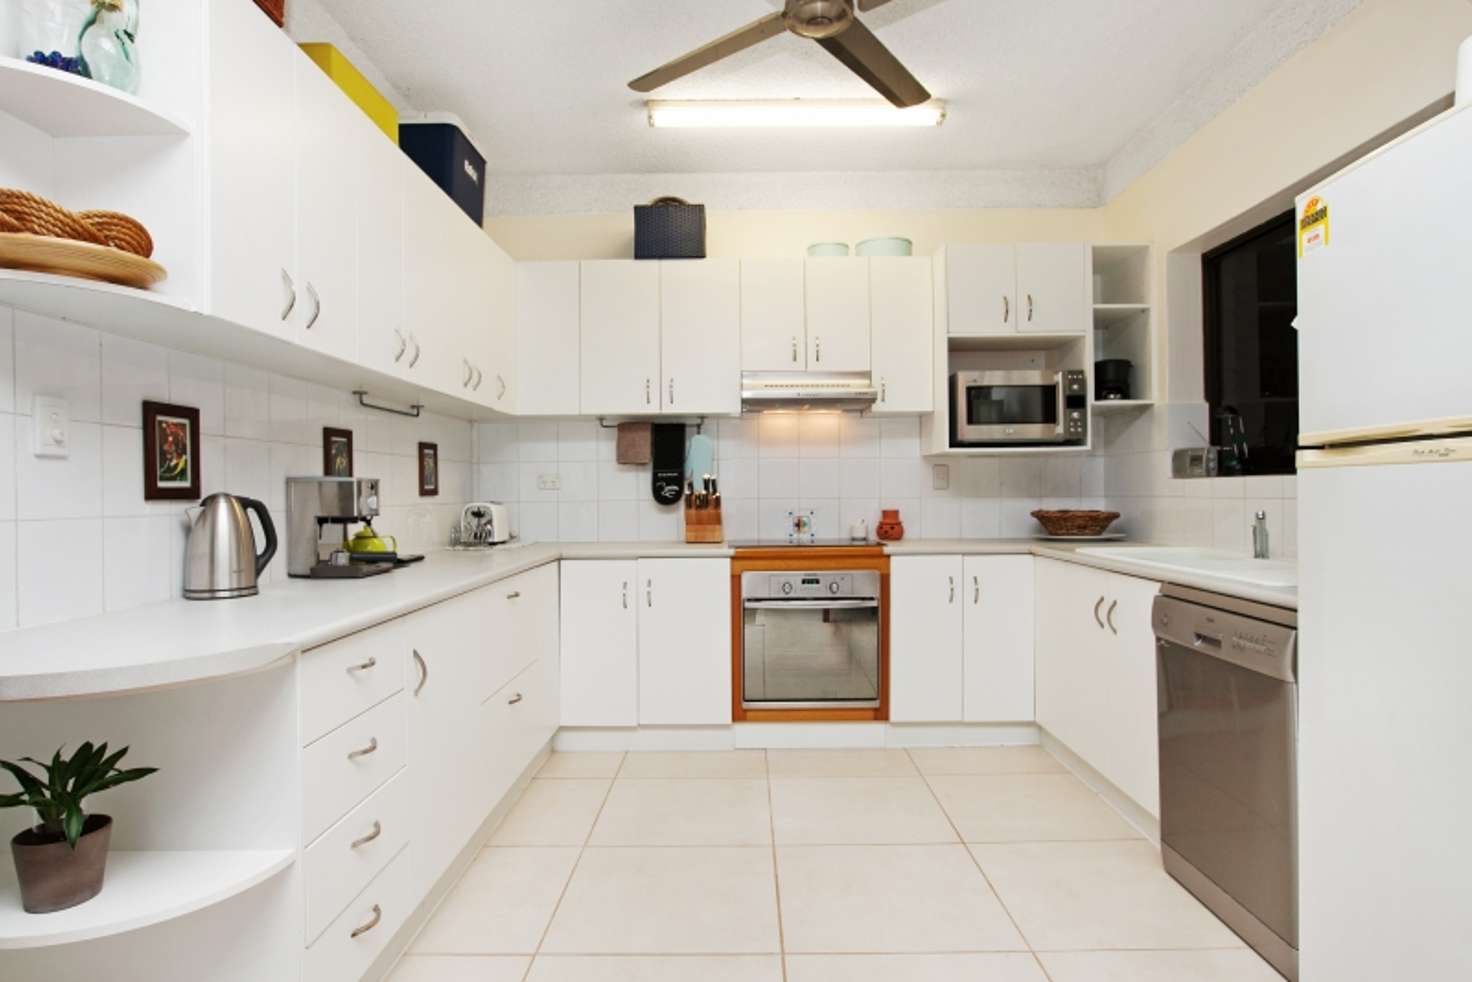 Main view of Homely apartment listing, 1/6 Beagle Street, Larrakeyah NT 820